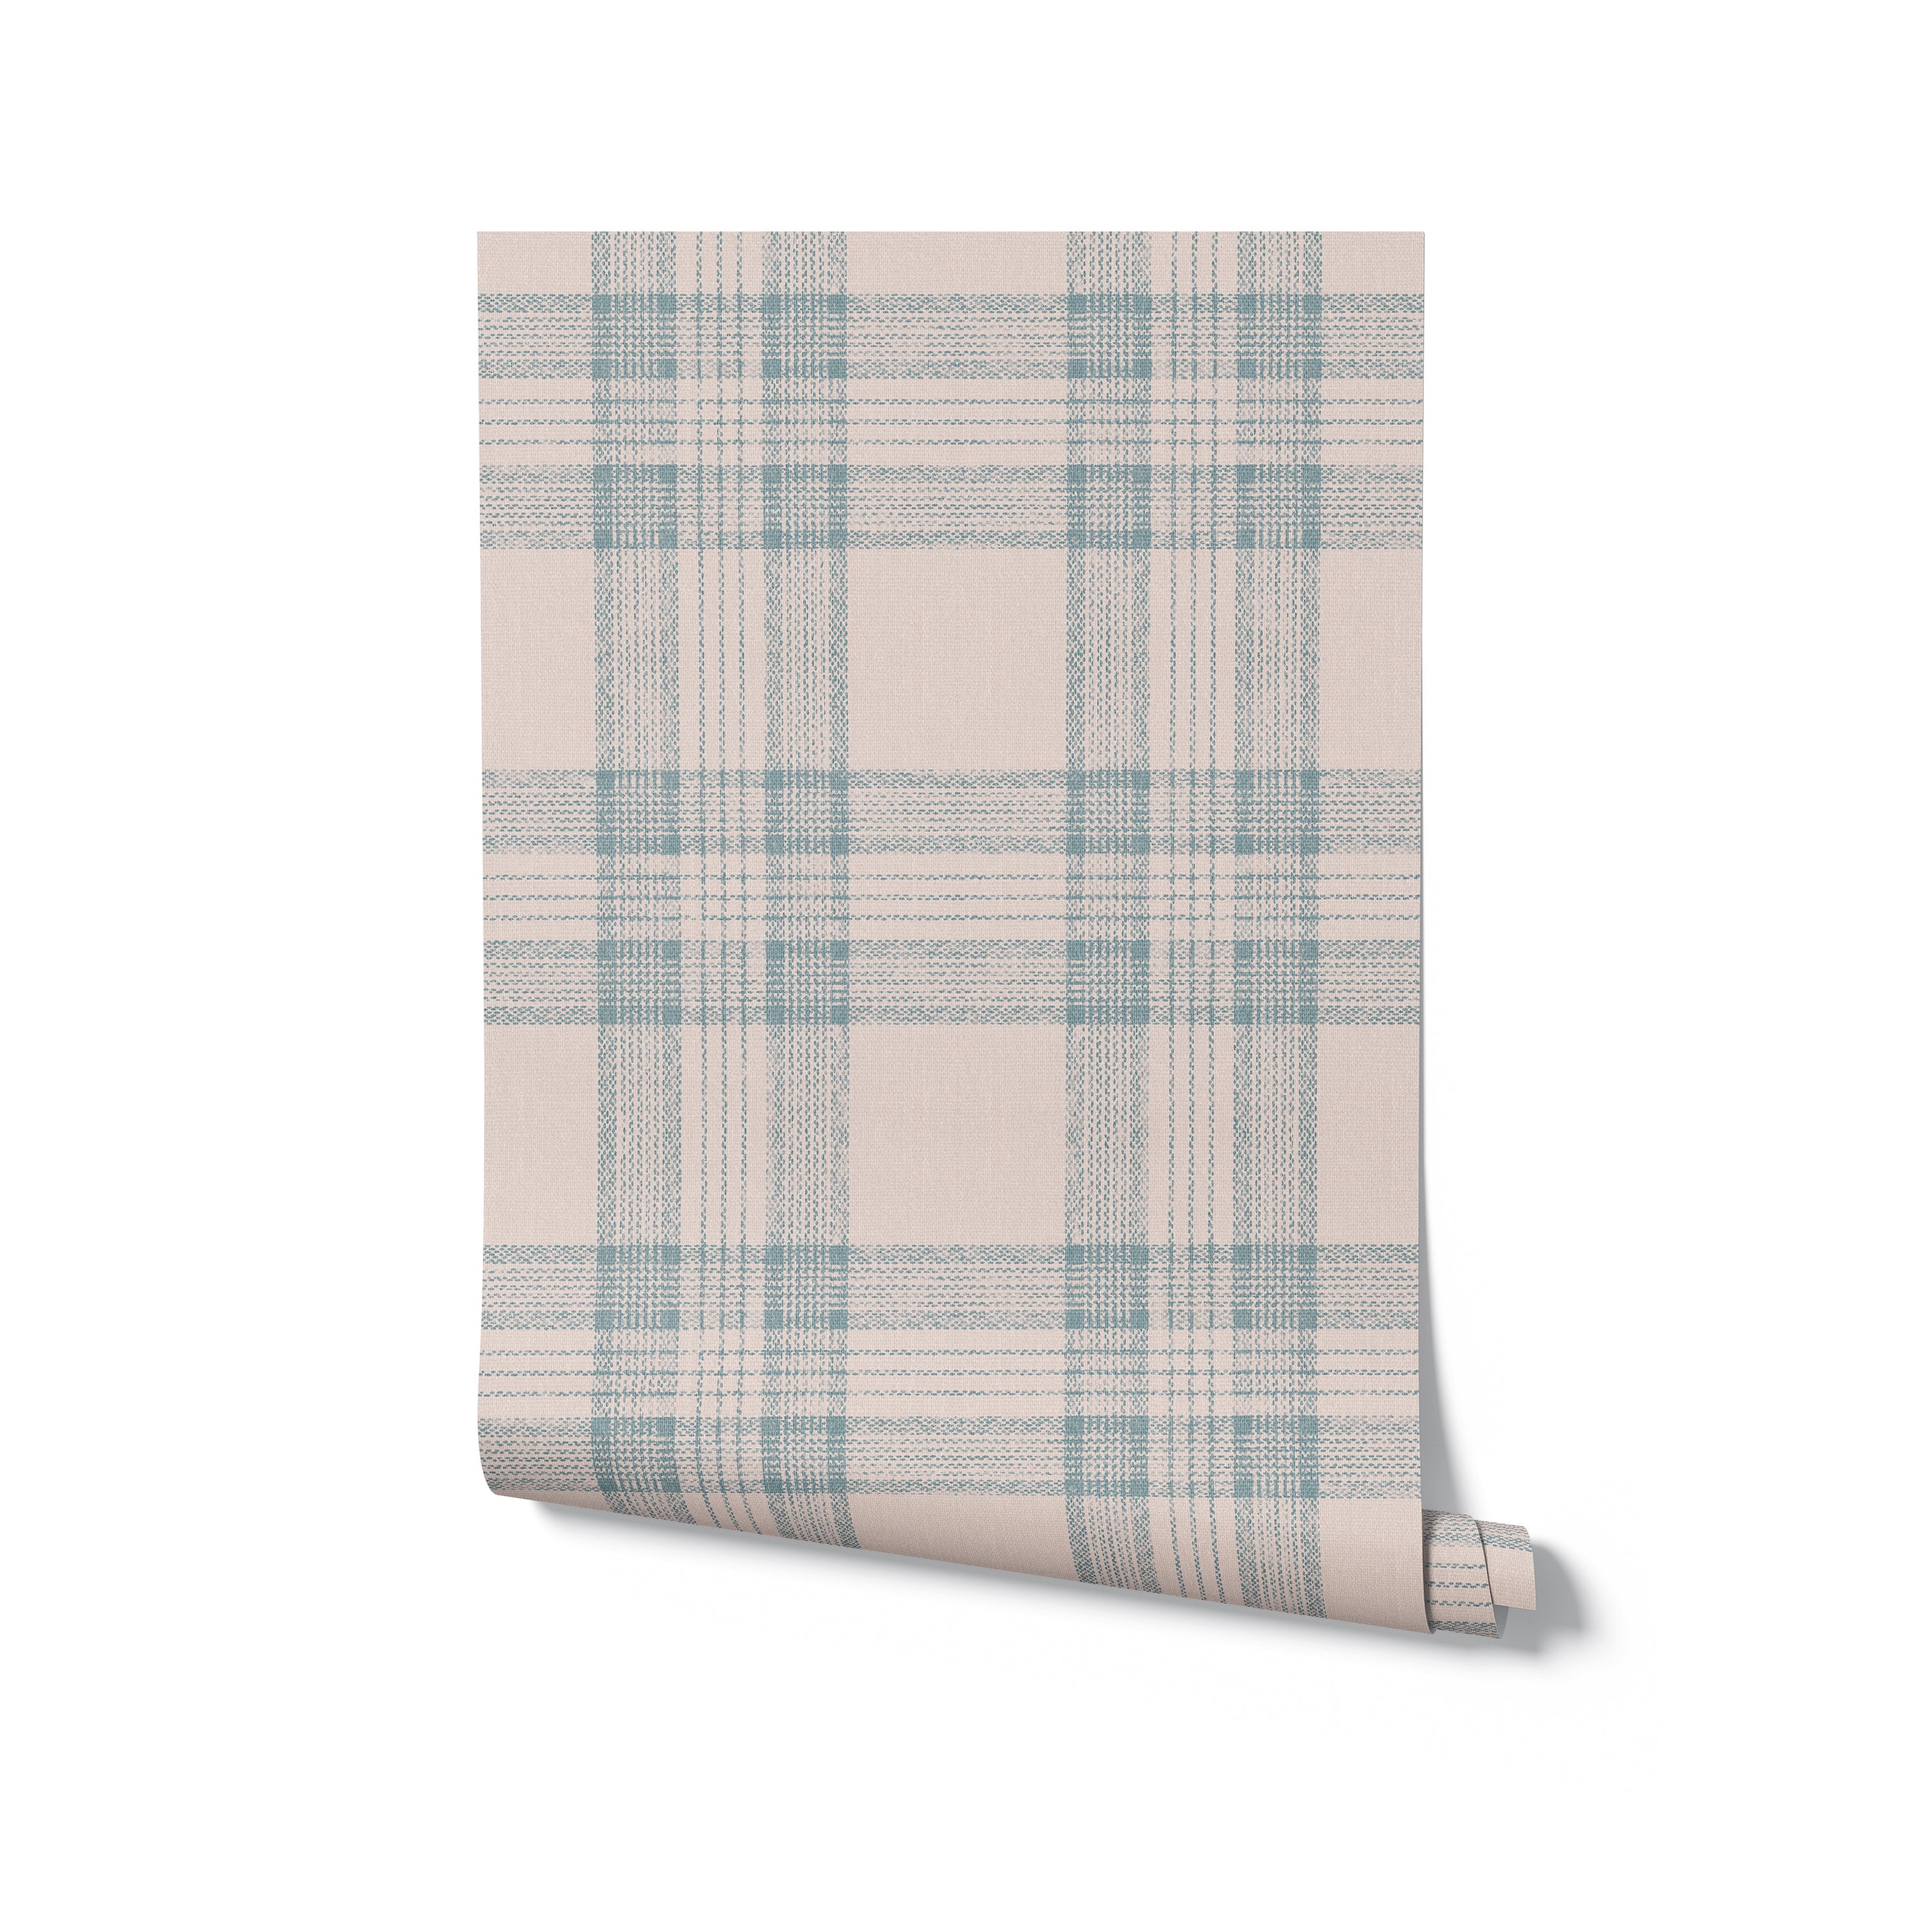 An image of a single roll of 'Plaid Wallpaper - Tartan Sand and Sky' unfurling slightly at the corner, revealing the pattern's detail. The wallpaper combines woven textures with lines of beige and light blue over a neutral cream background, perfect for adding a touch of classic elegance with a modern twist to interiors.